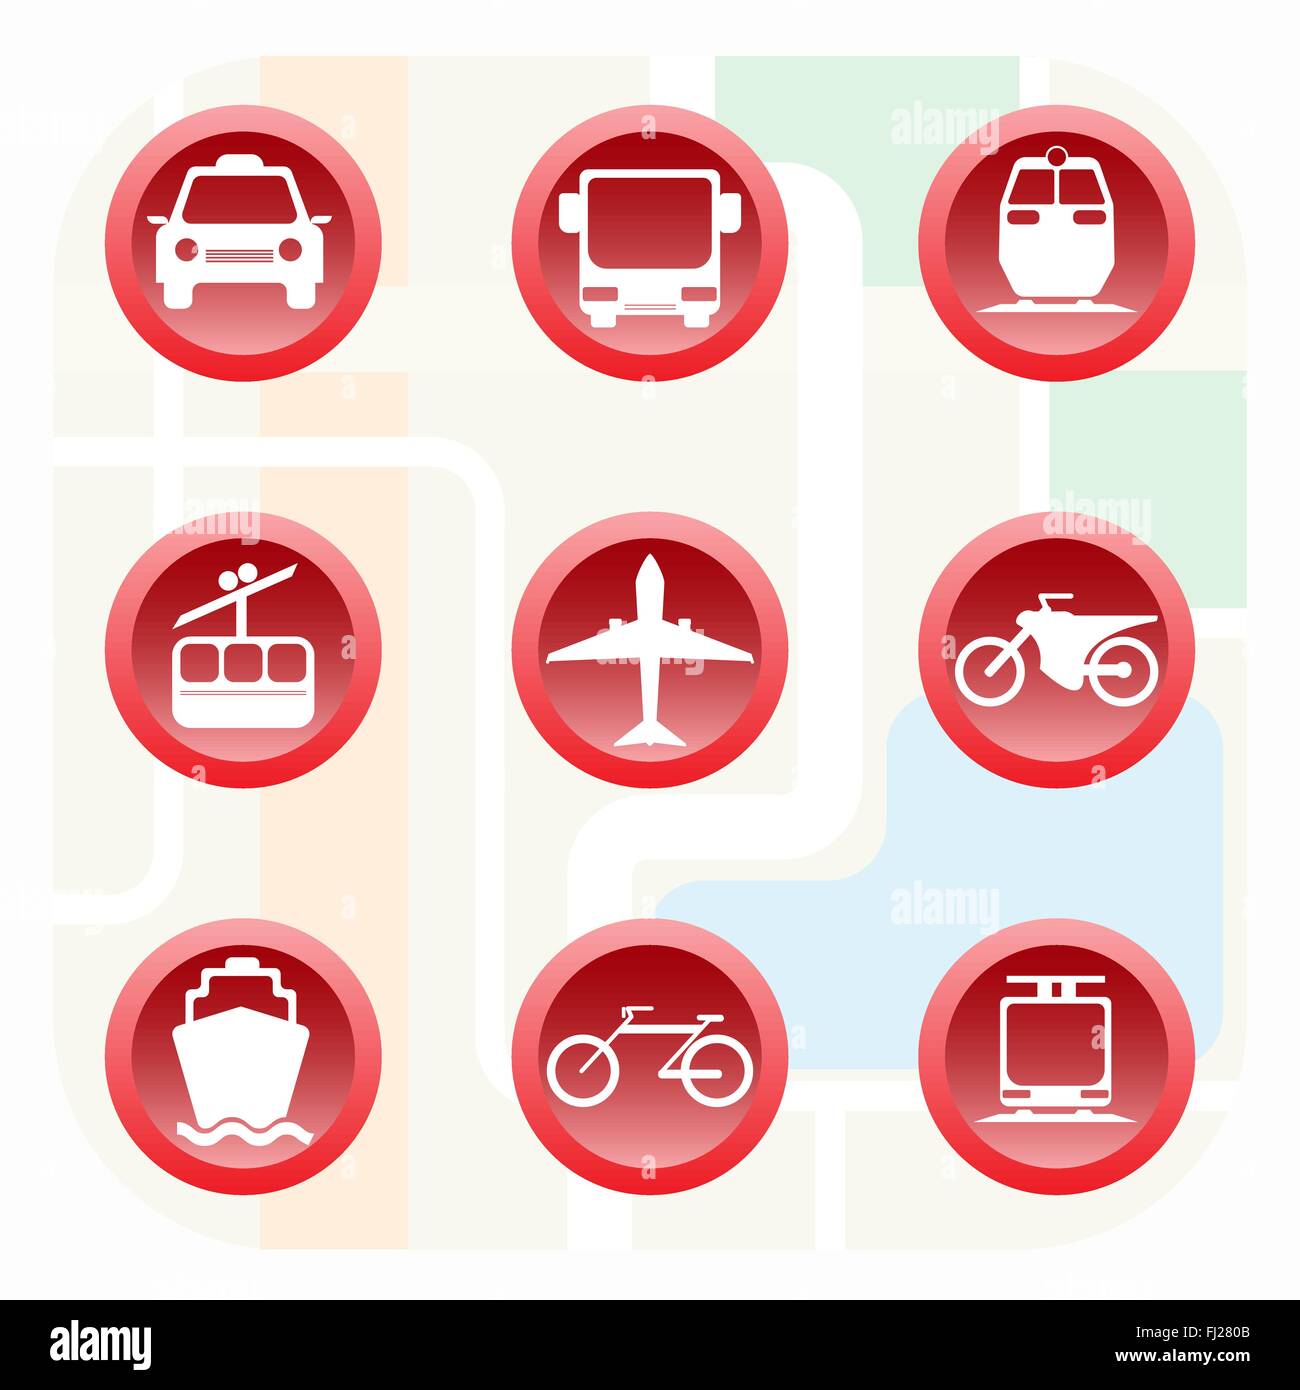 Transportation Big Icon Set. Car, Bus, Train, Cable way, Airplane, Motorcycle, Yacht, Bicycle, Cable Railway. Digital background Stock Vector